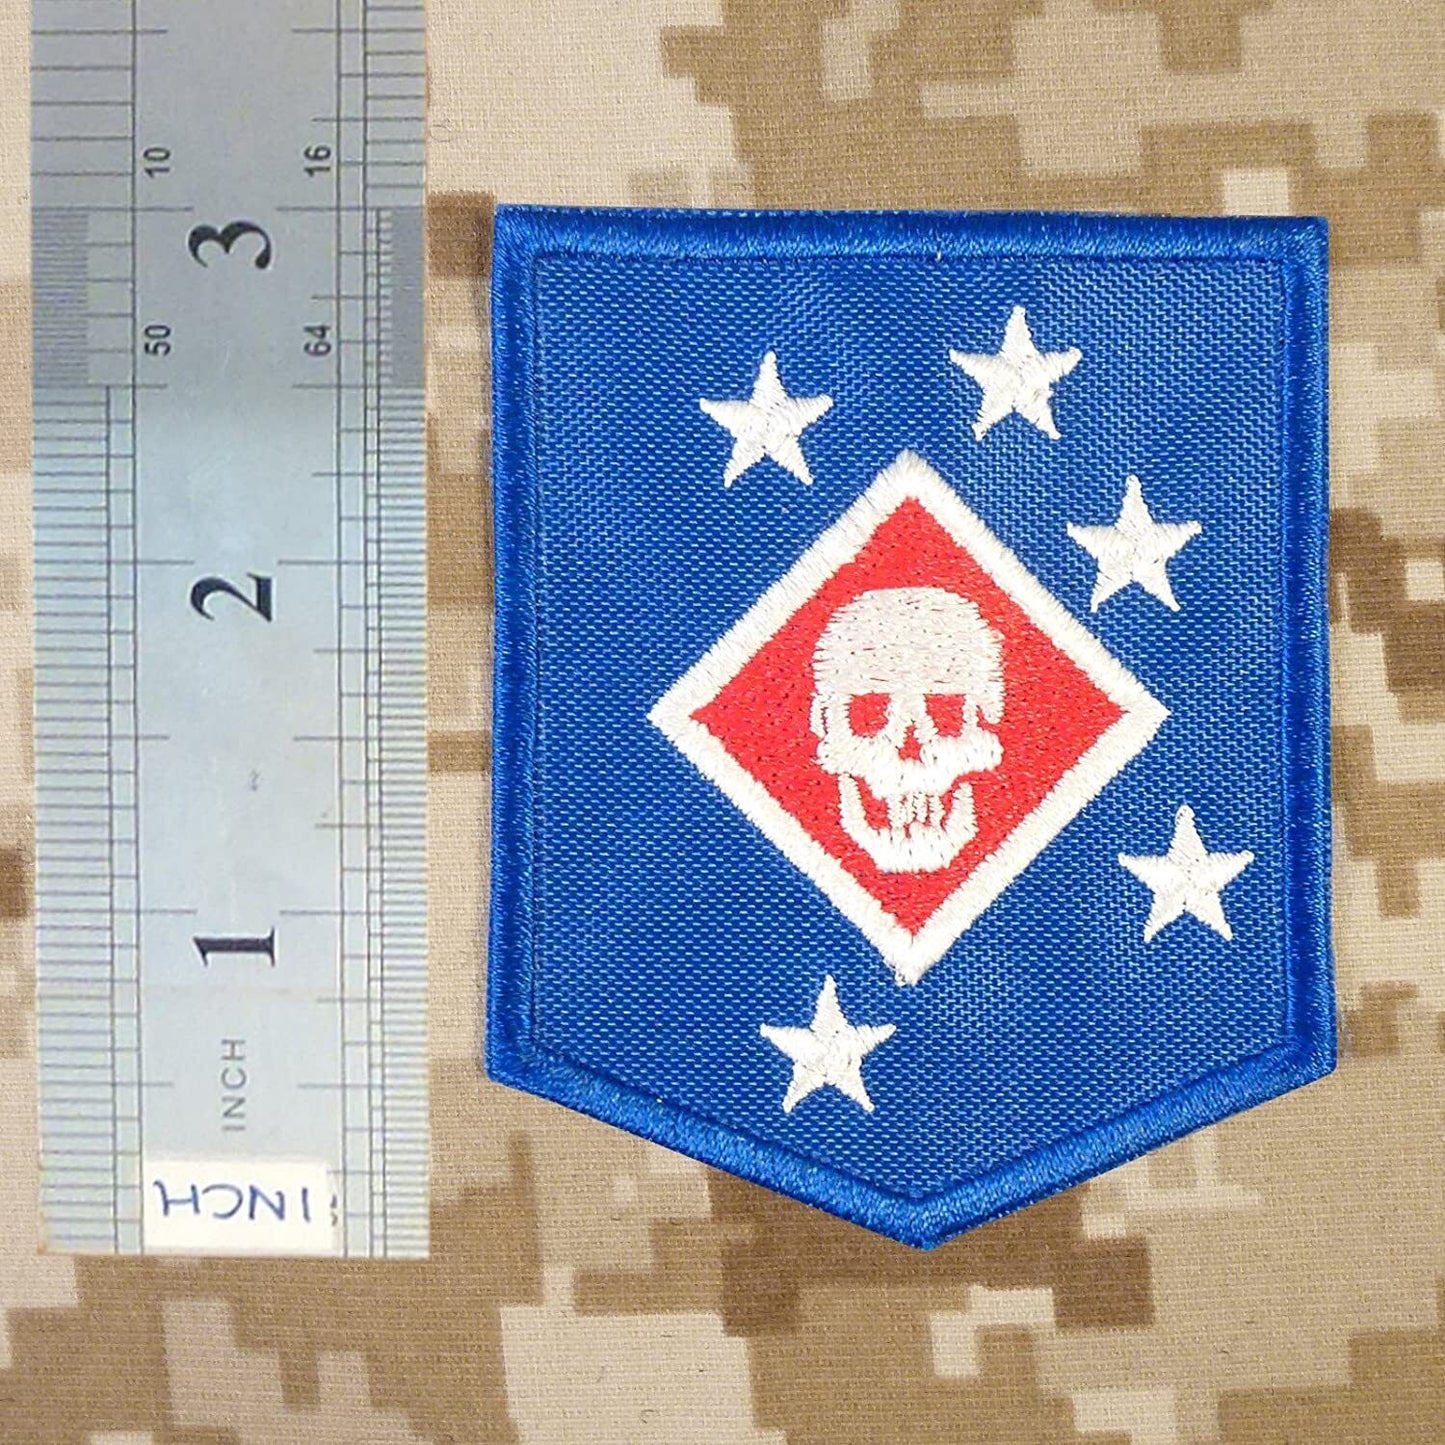 USMC Raiders Marines Regiment Patch (3 Inch) MARSOC Velcro Badge Tactical Special Ops Military Army Patches